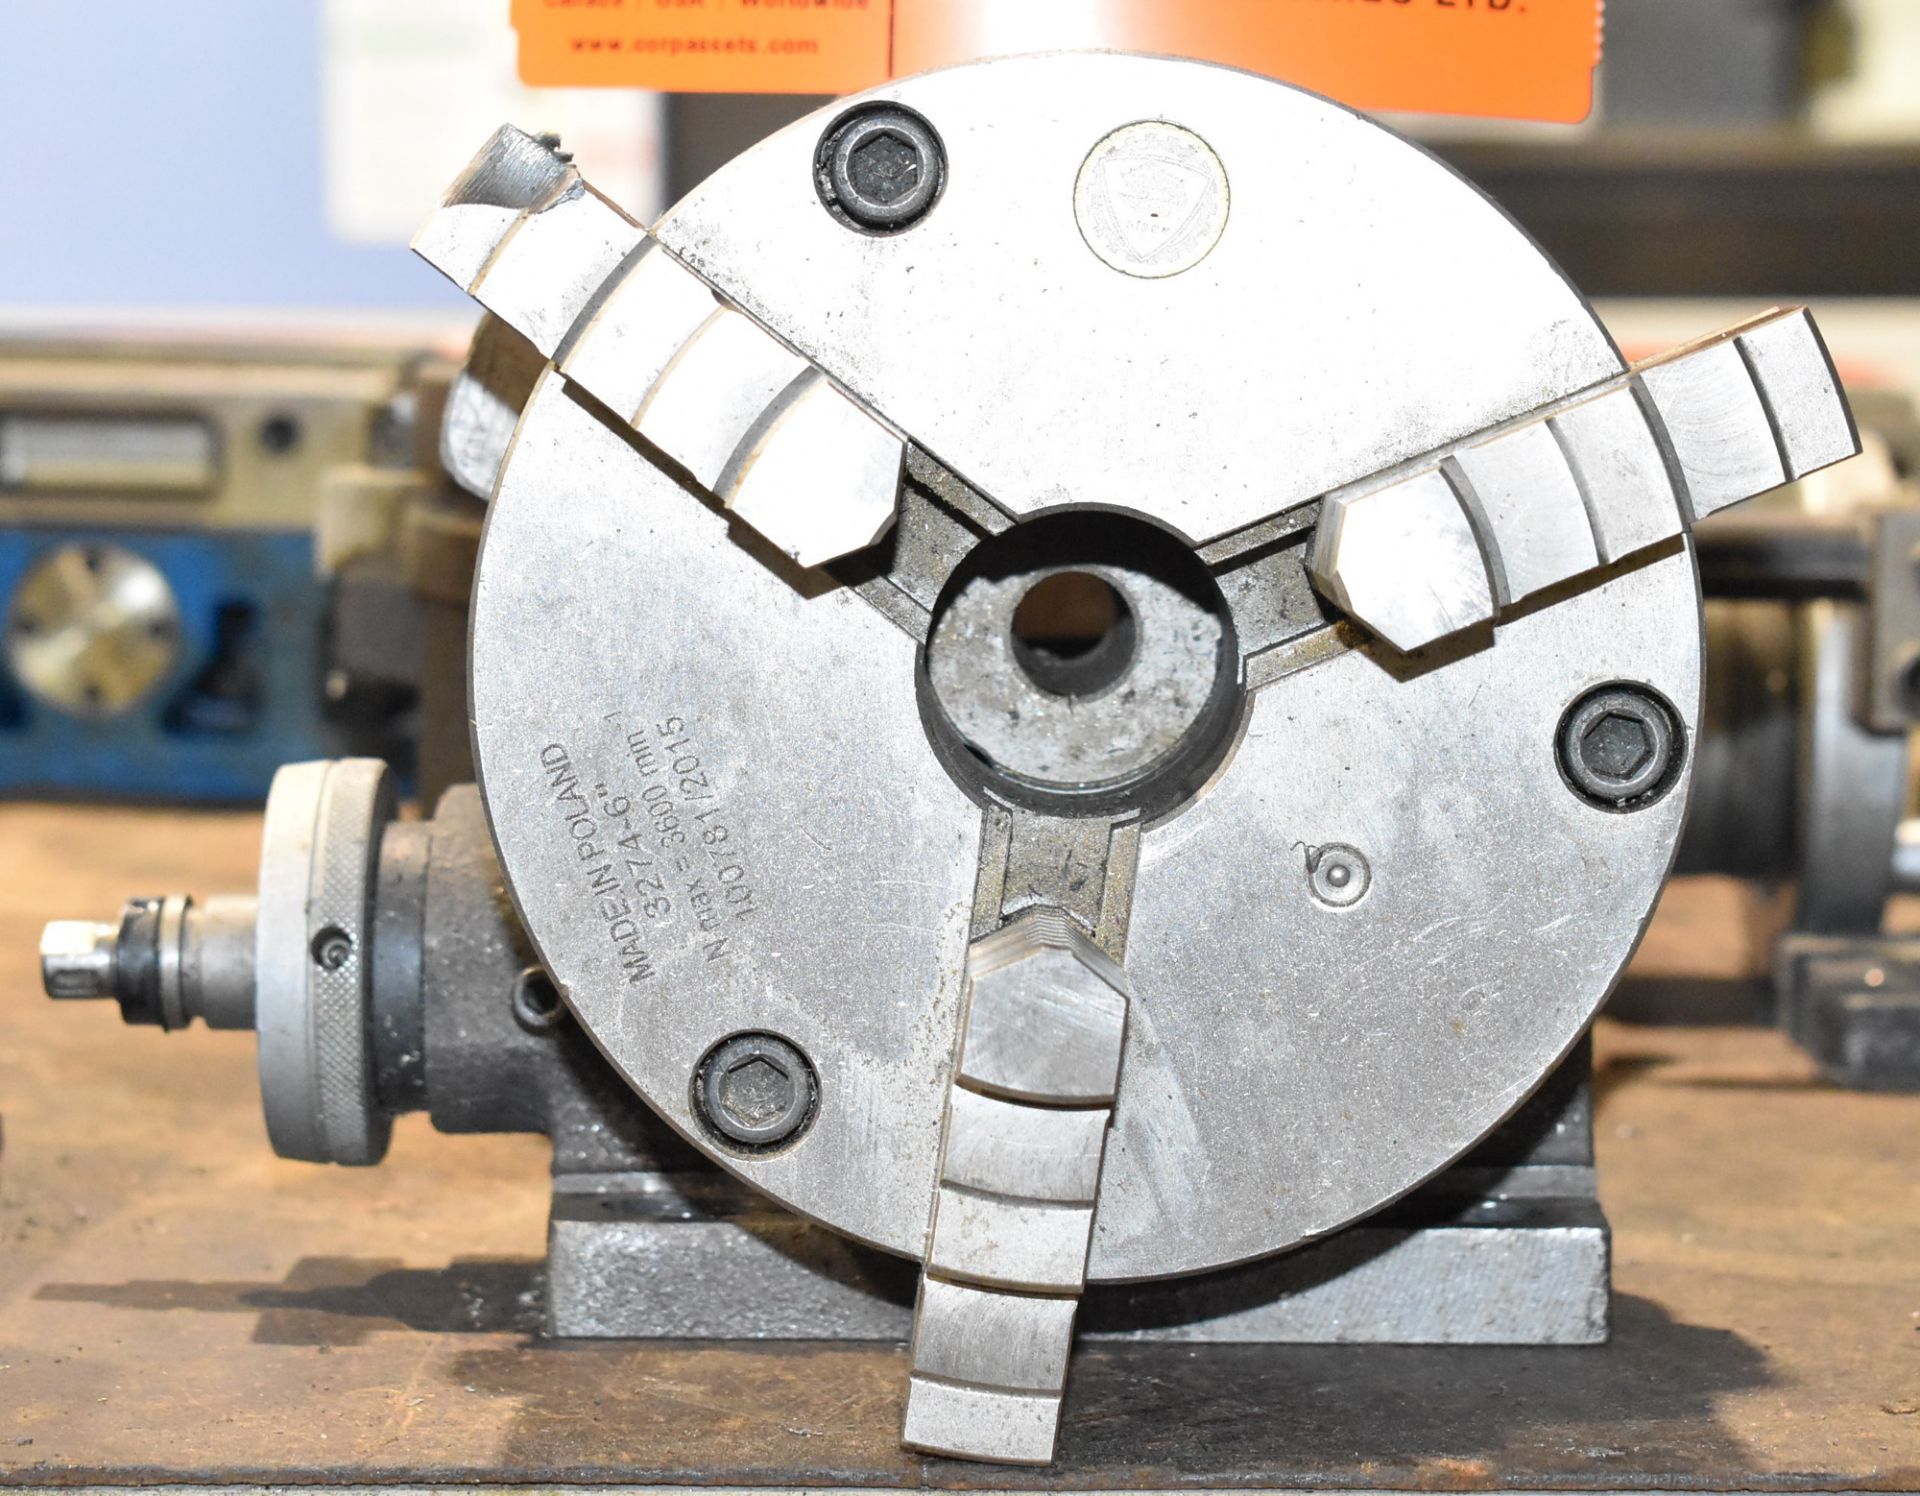 STM HV-6 6" ROTARY INDEXING TABLE WITH BISON 6" 3-JAW CHUCK, S/N N/A - Image 2 of 5